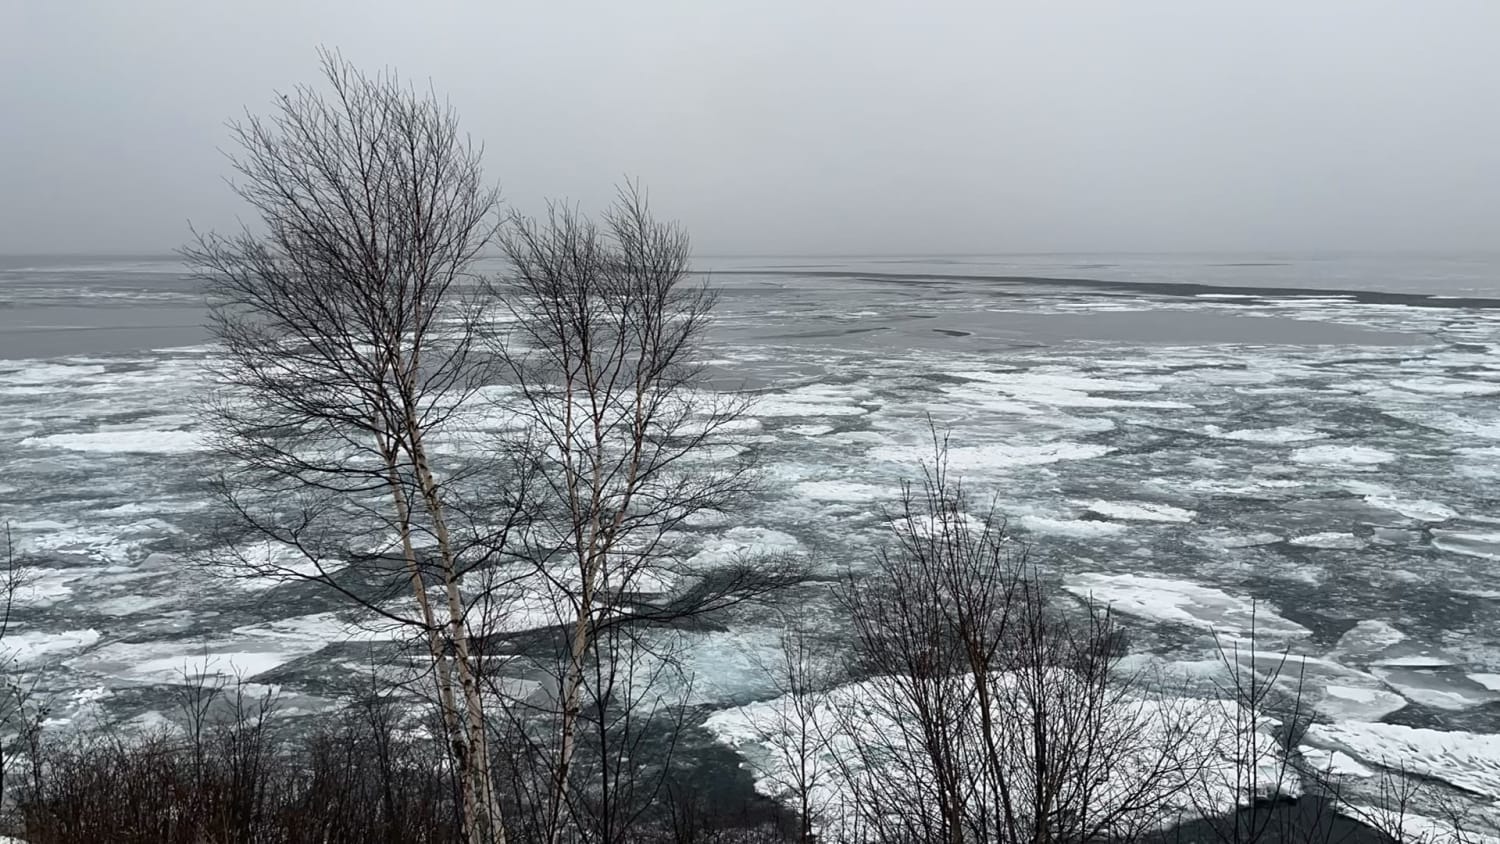 Time lapse of an icy, windy Lake Superior today